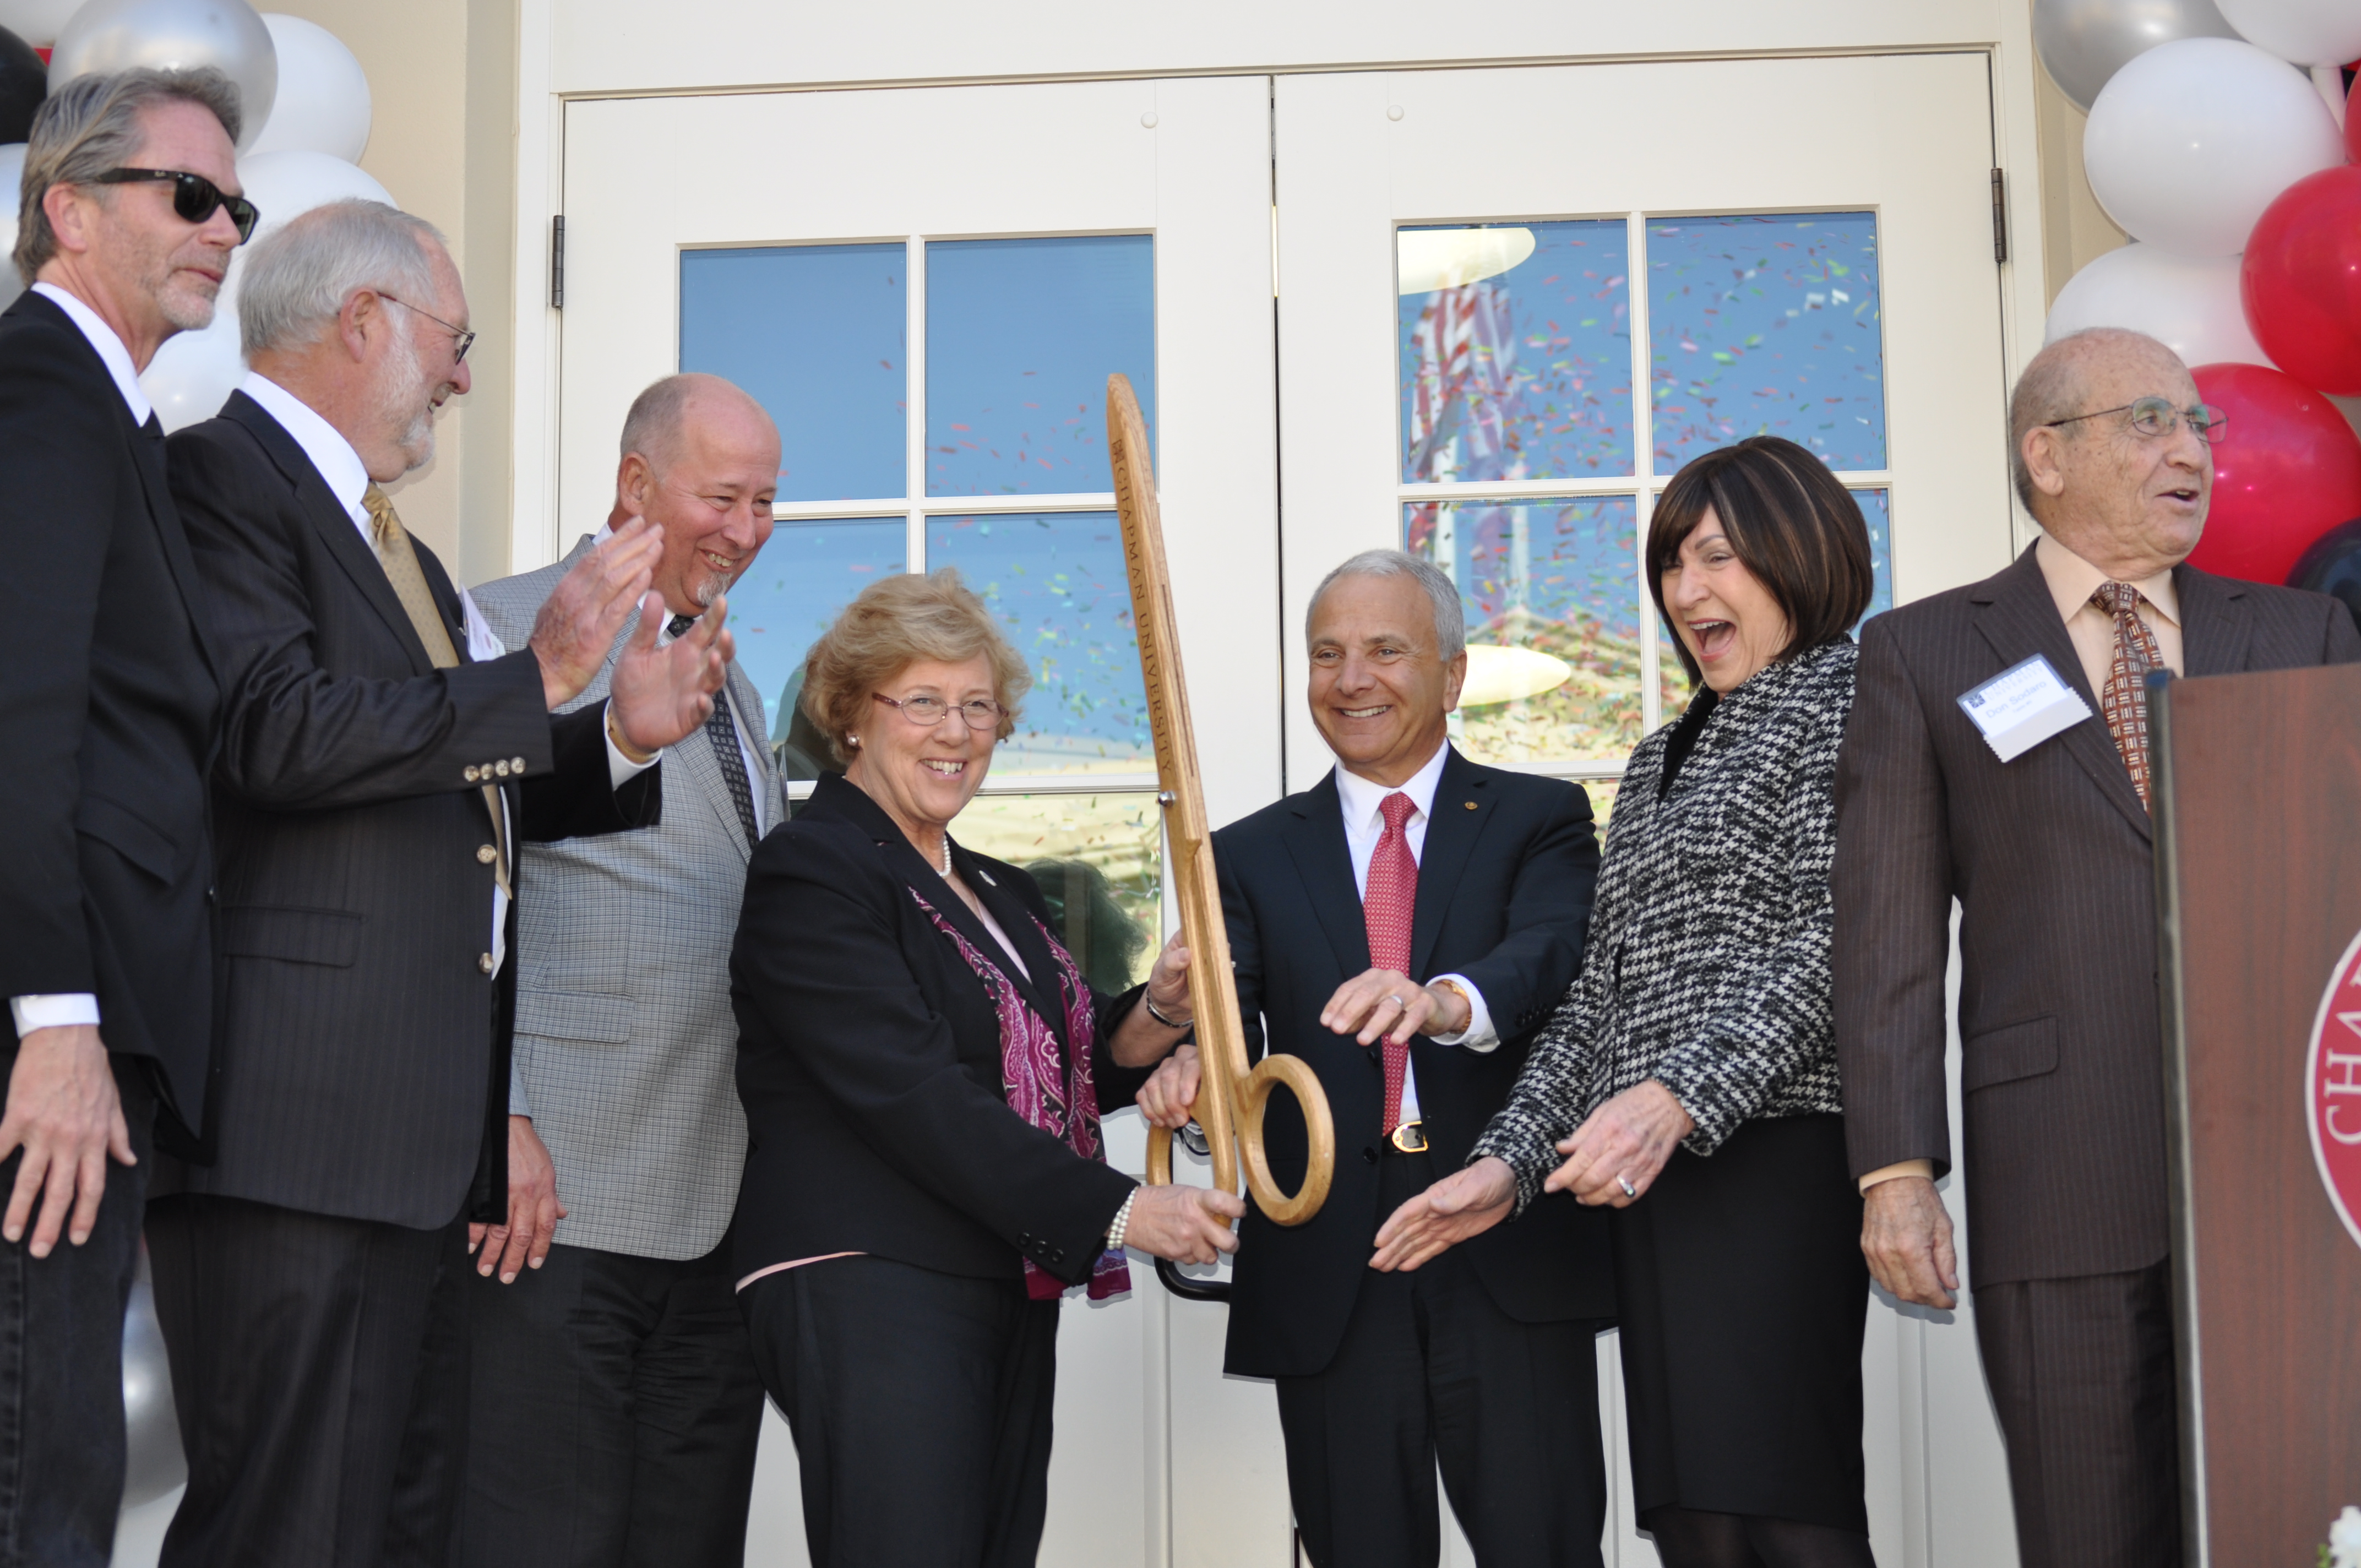 The James L. and Lynne Pierson Doti Hall was officially dedicated Friday, Feb. 22, following the president's annual State of the University address.